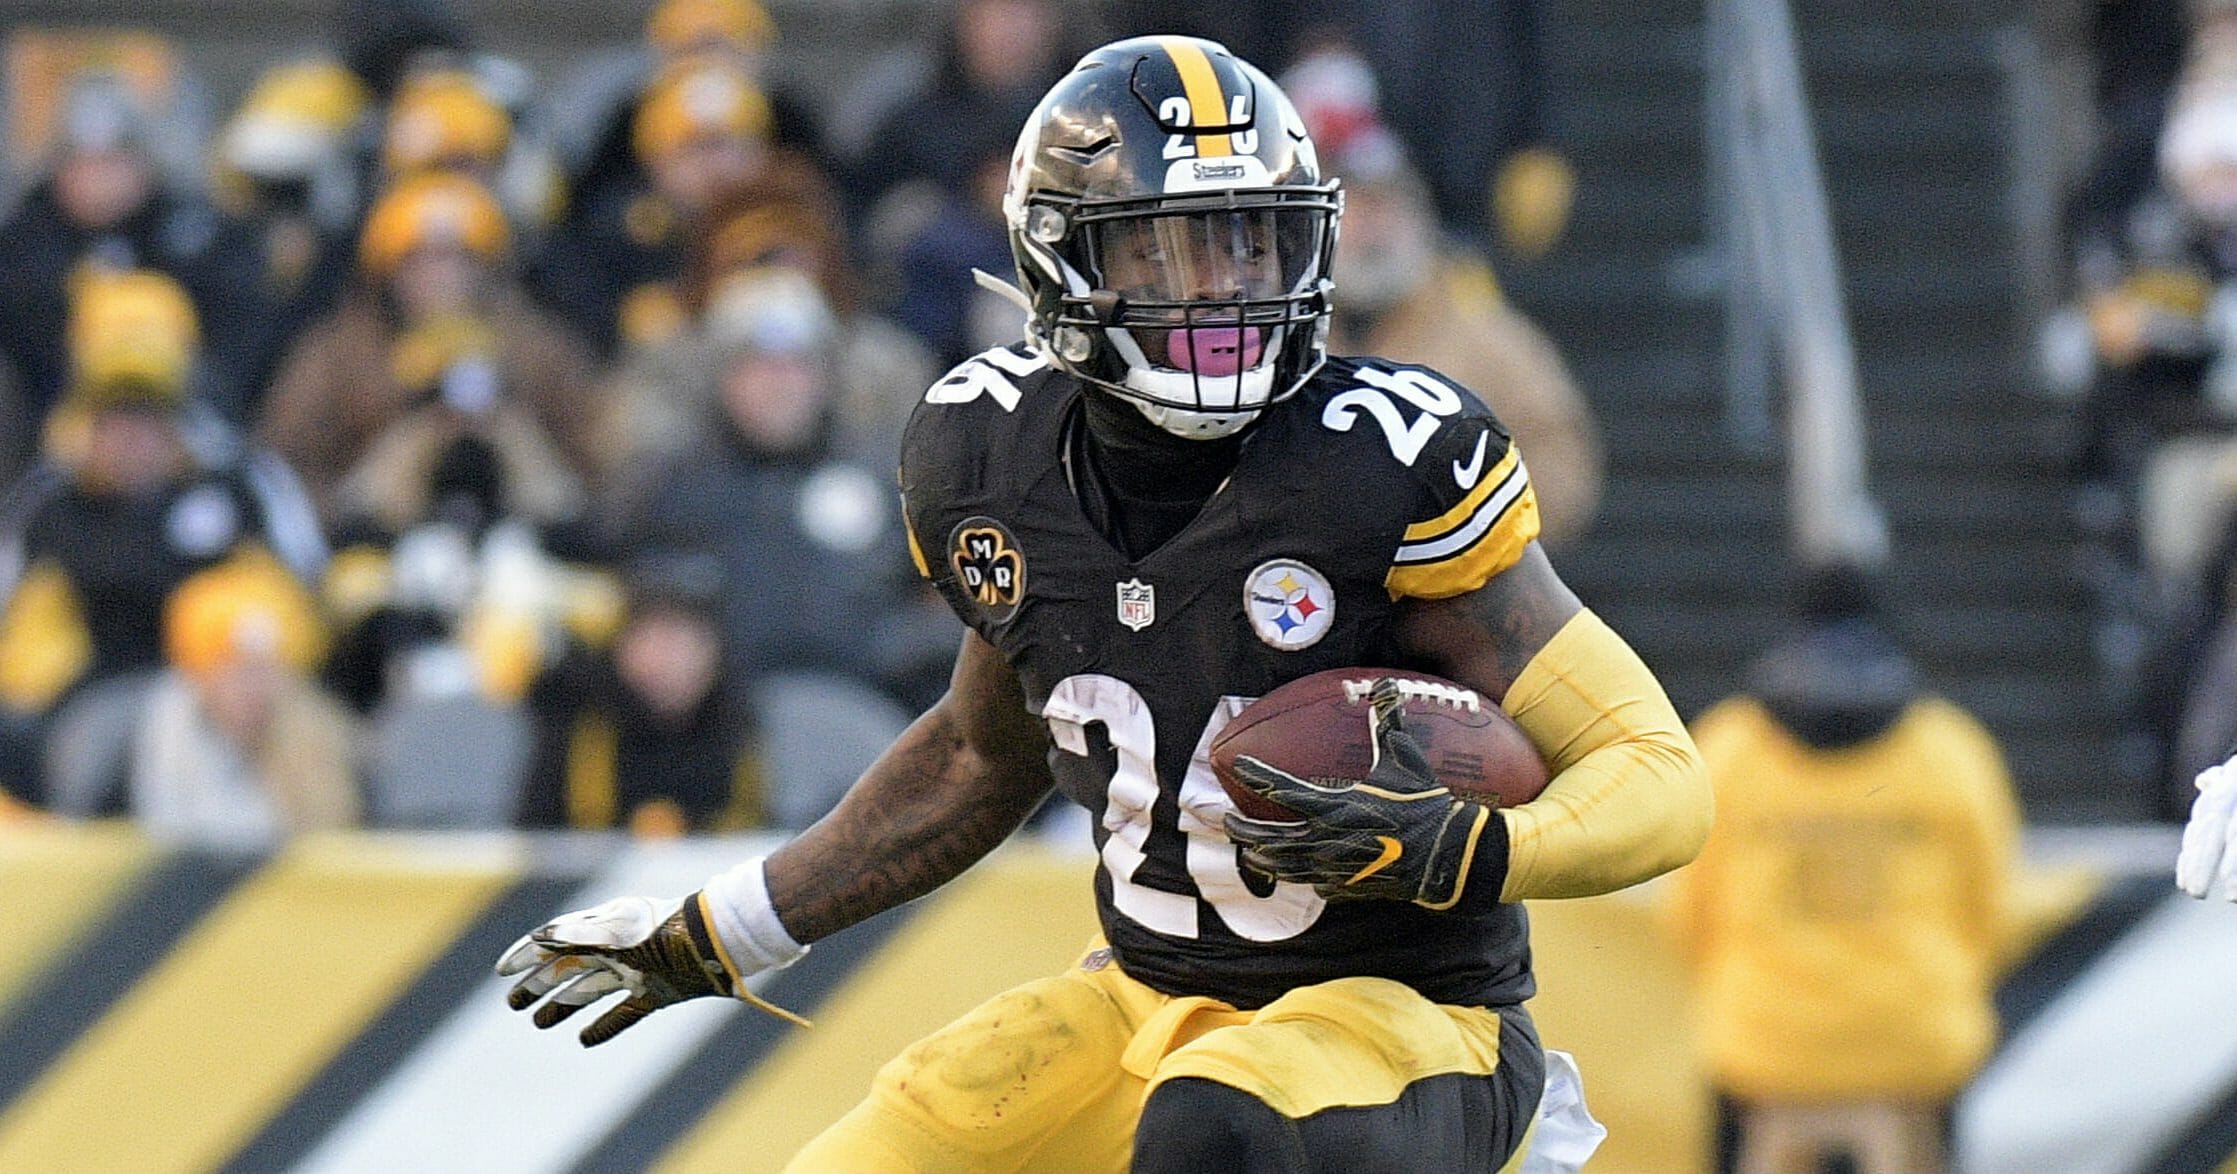 Running back Le'Veon Bell carries the ball for the Pittsburgh Steelers against the Jacksonville Jaguars.